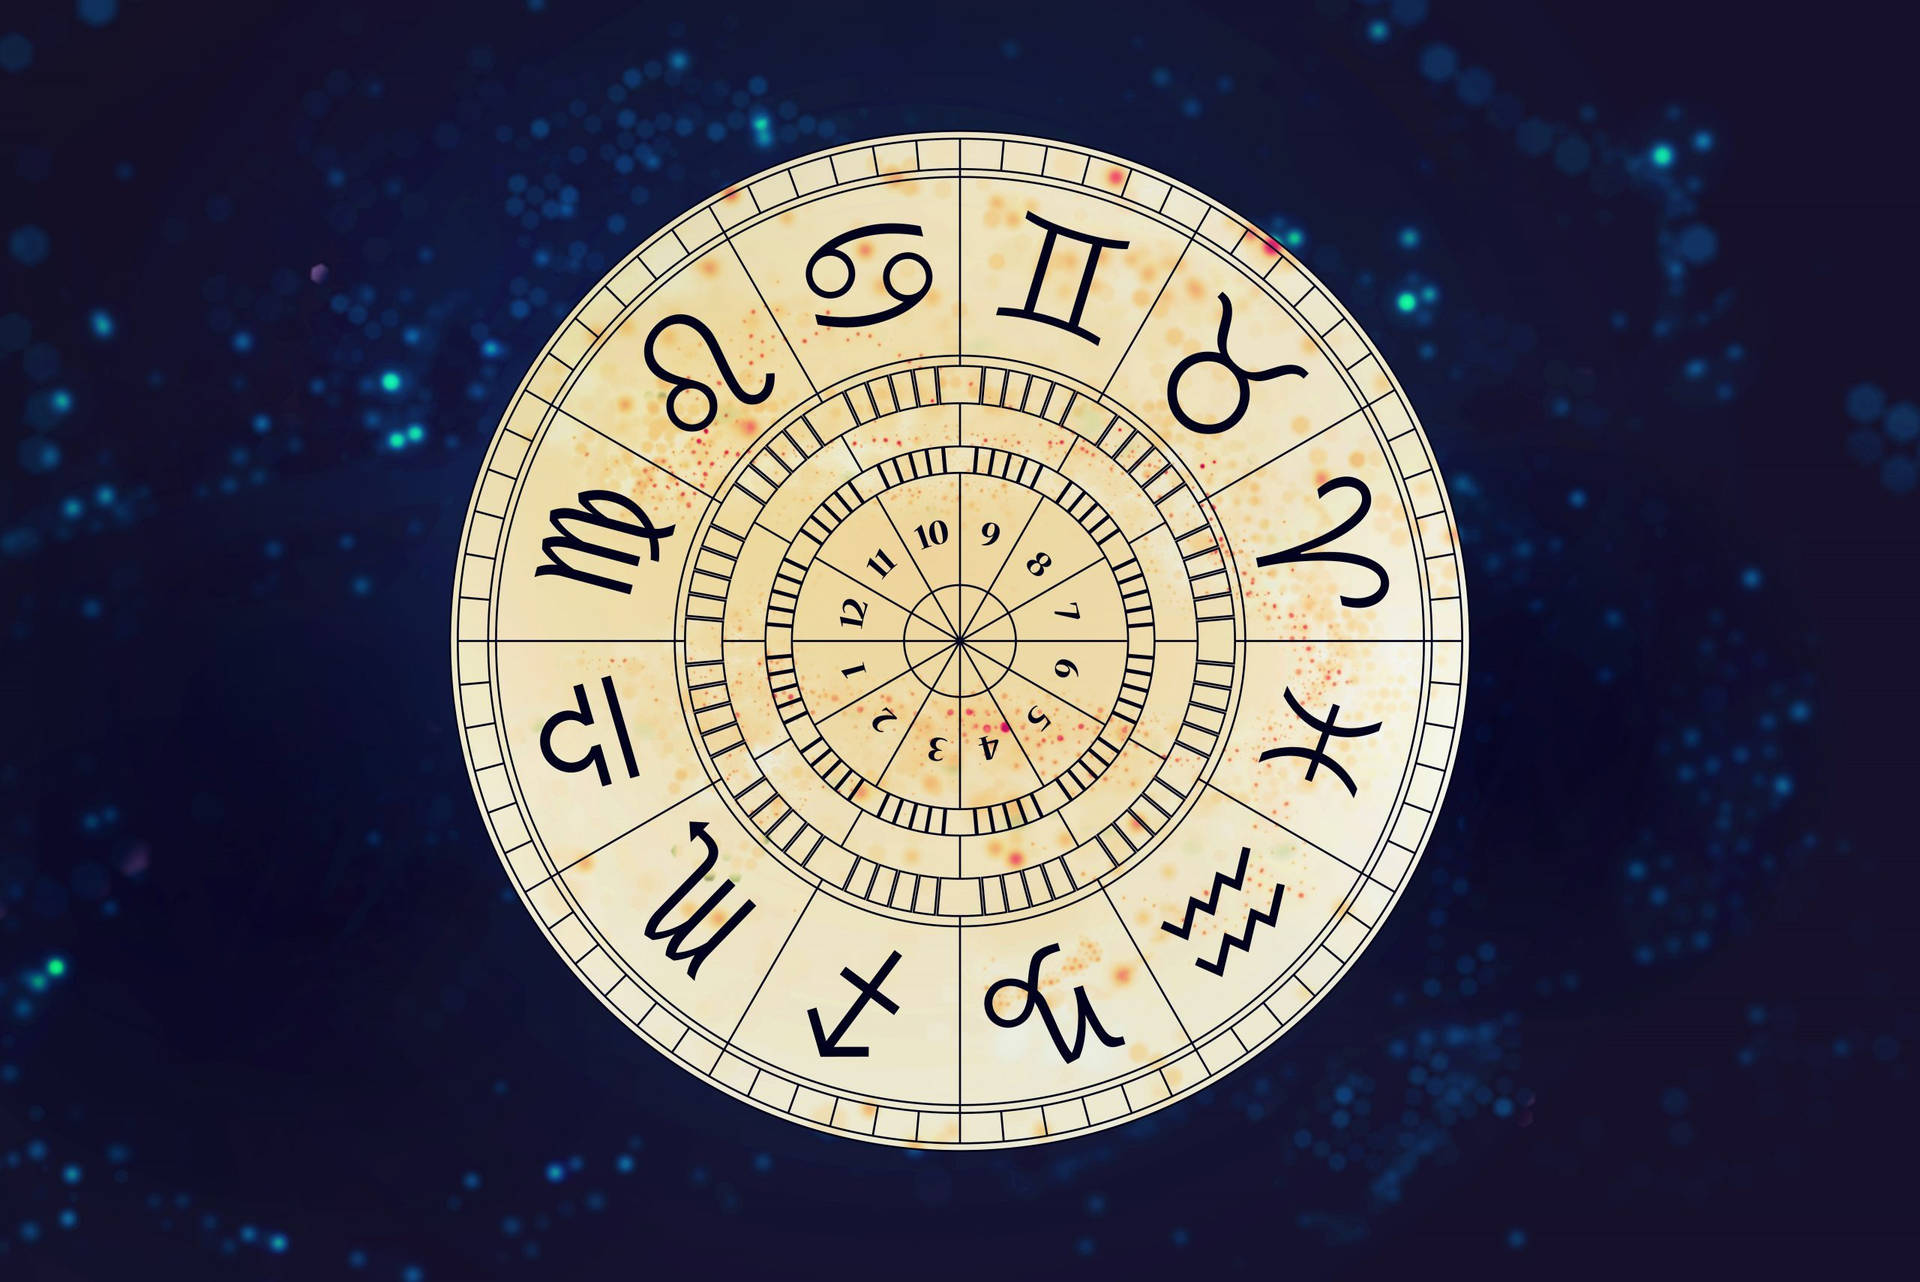 Astrologistjärntecken Och Vind Elementet. (note: In Swedish, The Order Of Words In A Sentence May Be Different From English, But The Overall Meaning Remains The Same) Wallpaper